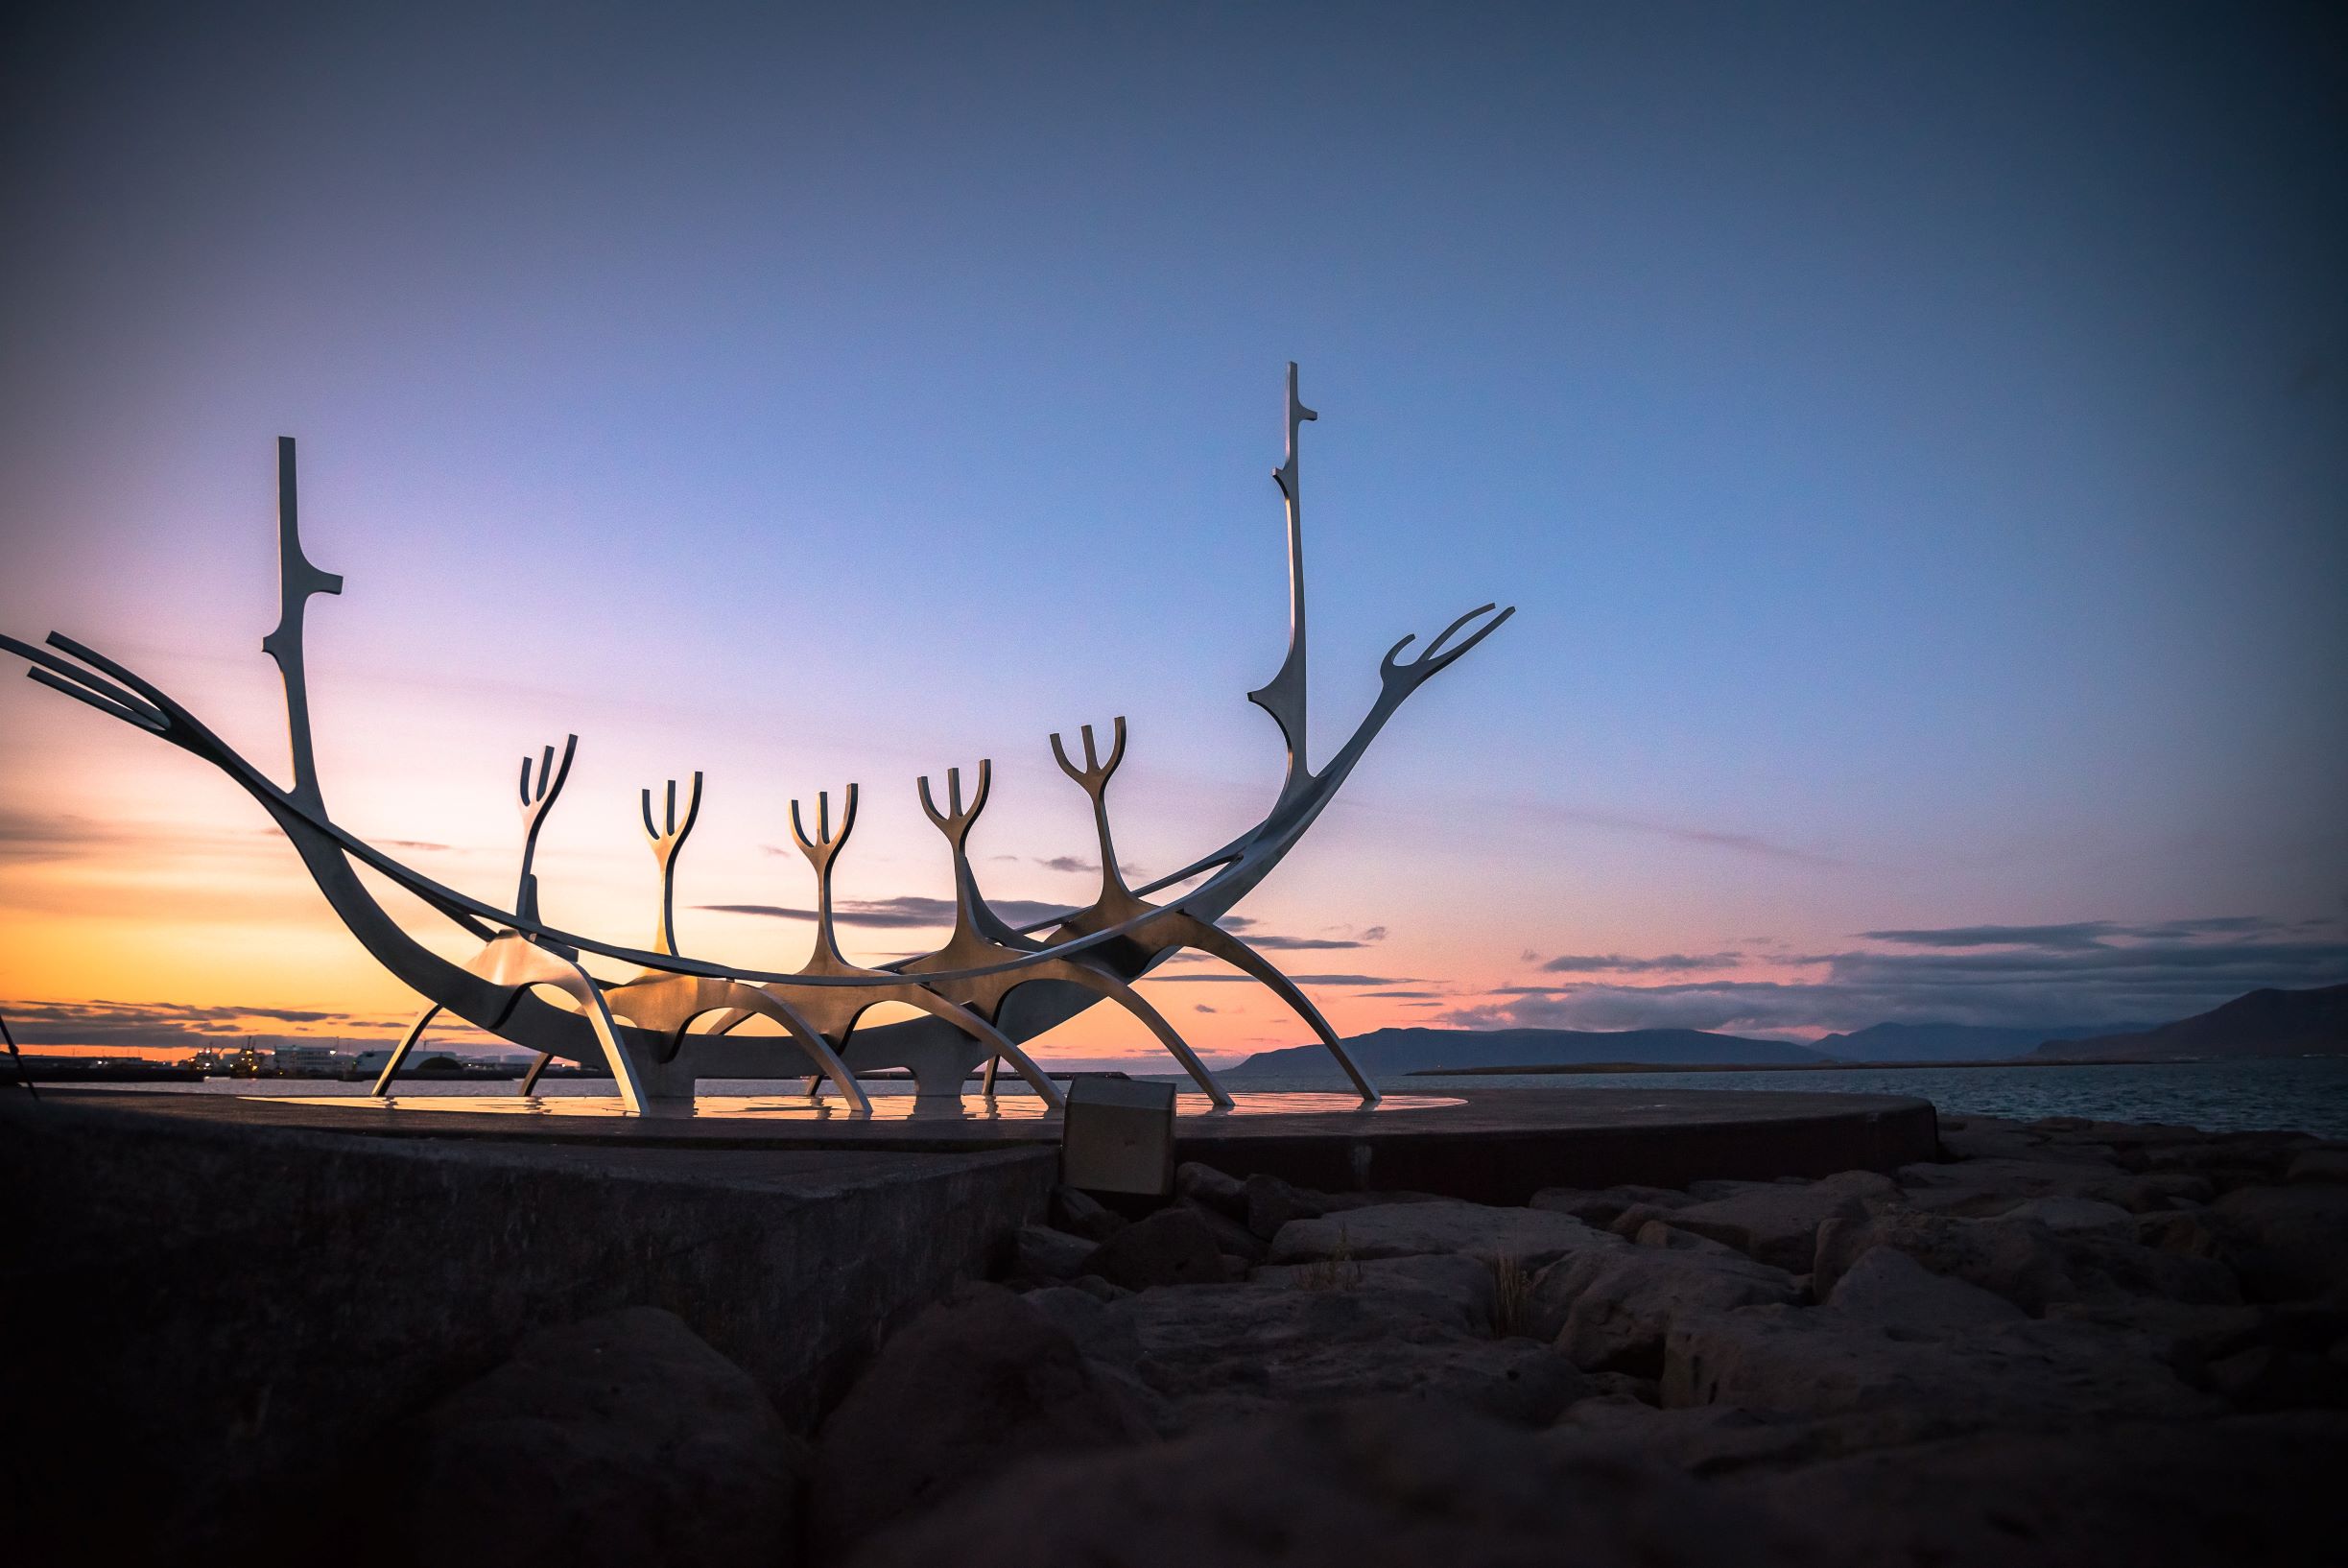 The sun voyager structure in Reykjavik pictured at sunset